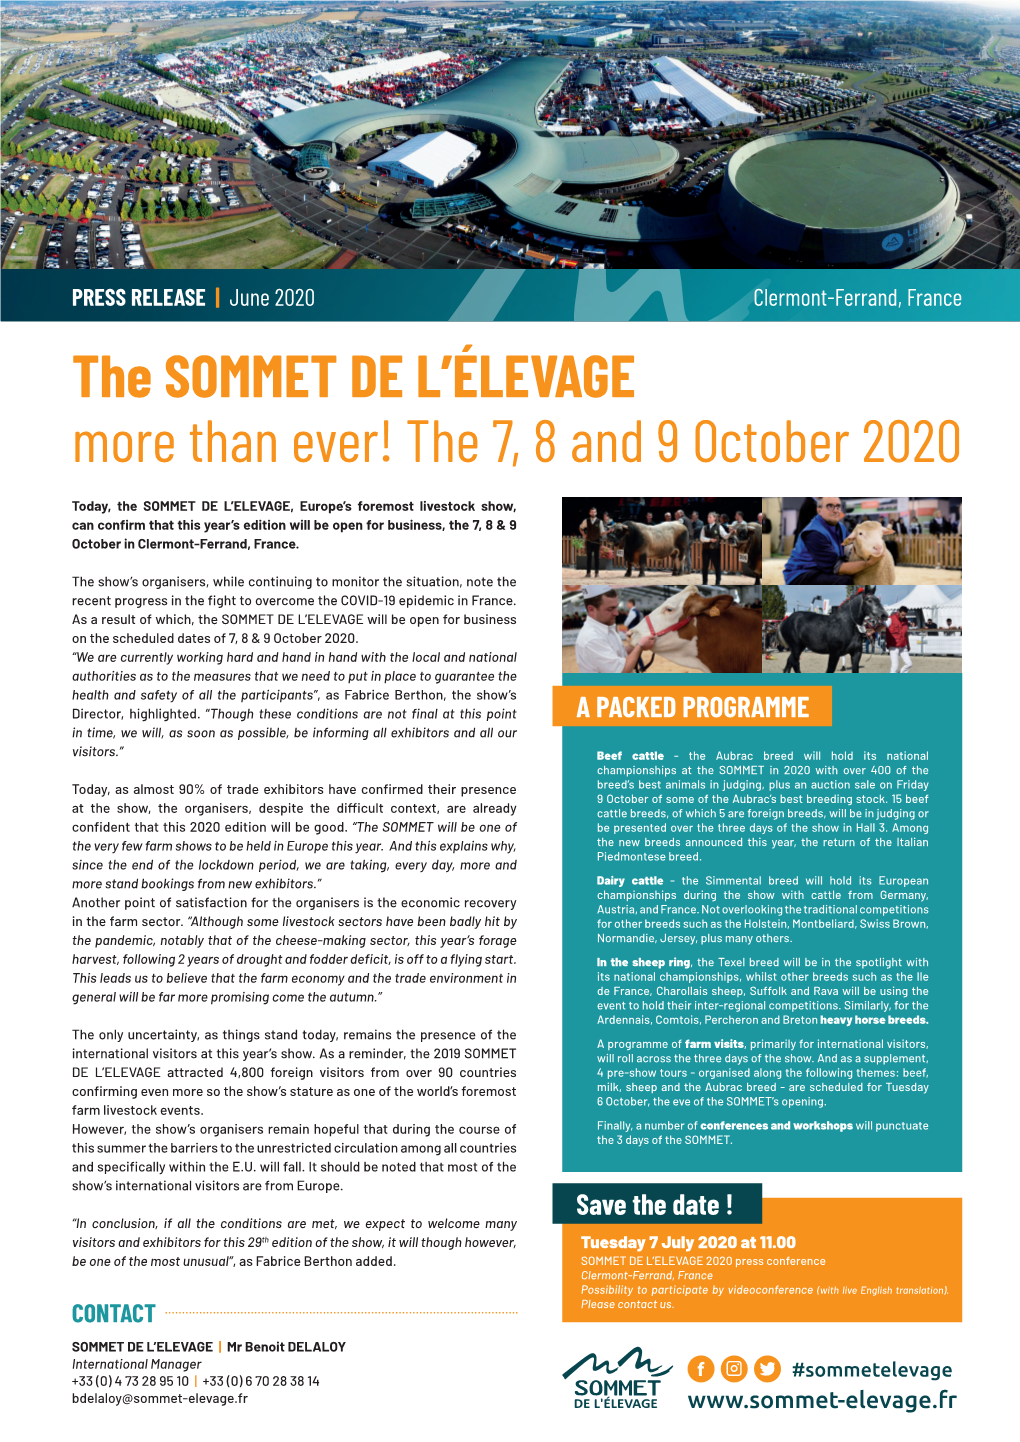 The SOMMET DE L'élevage More Than Ever! the 7, 8 and 9 October